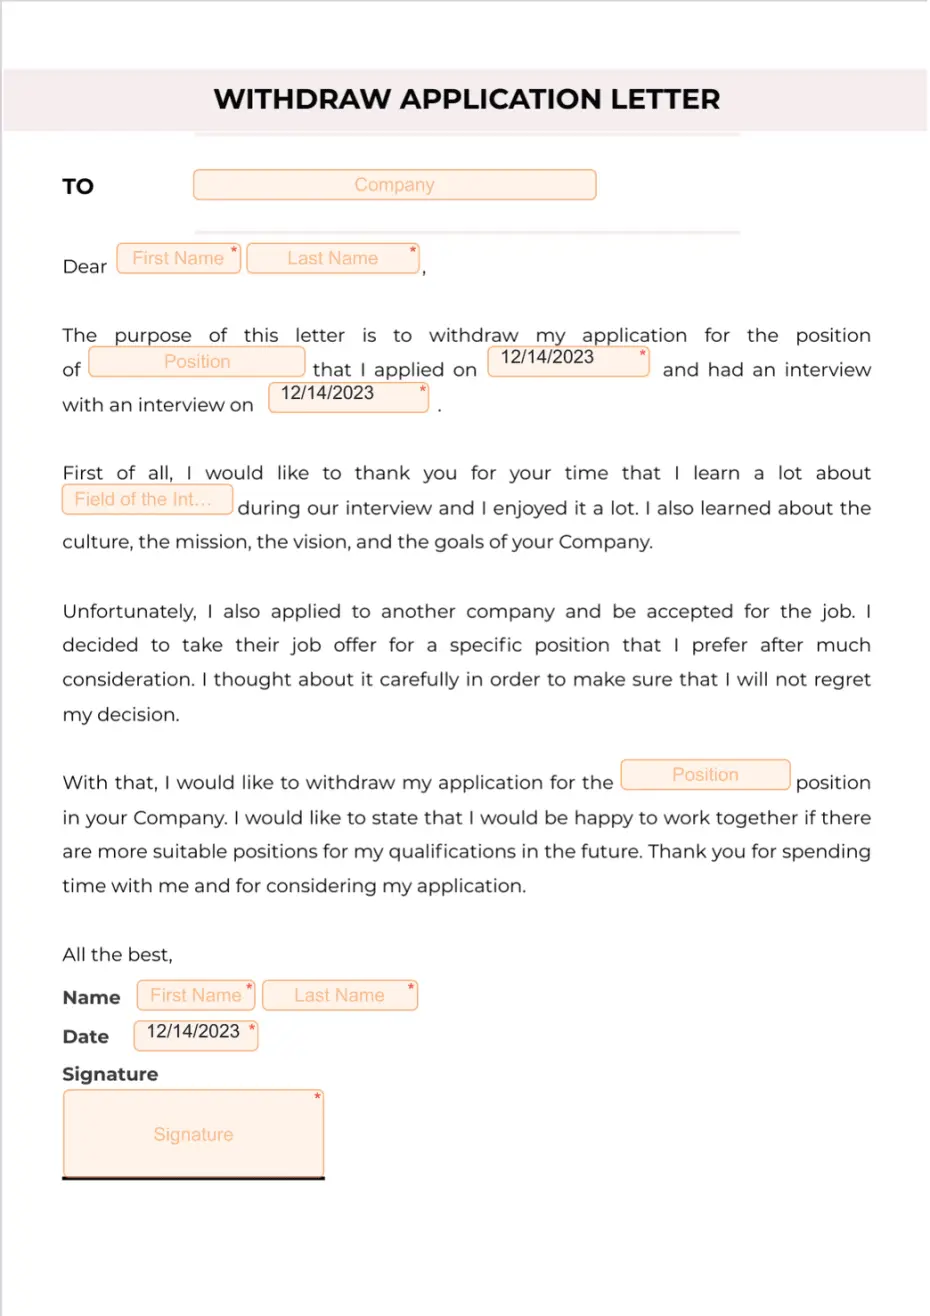 Withdraw Application Letter